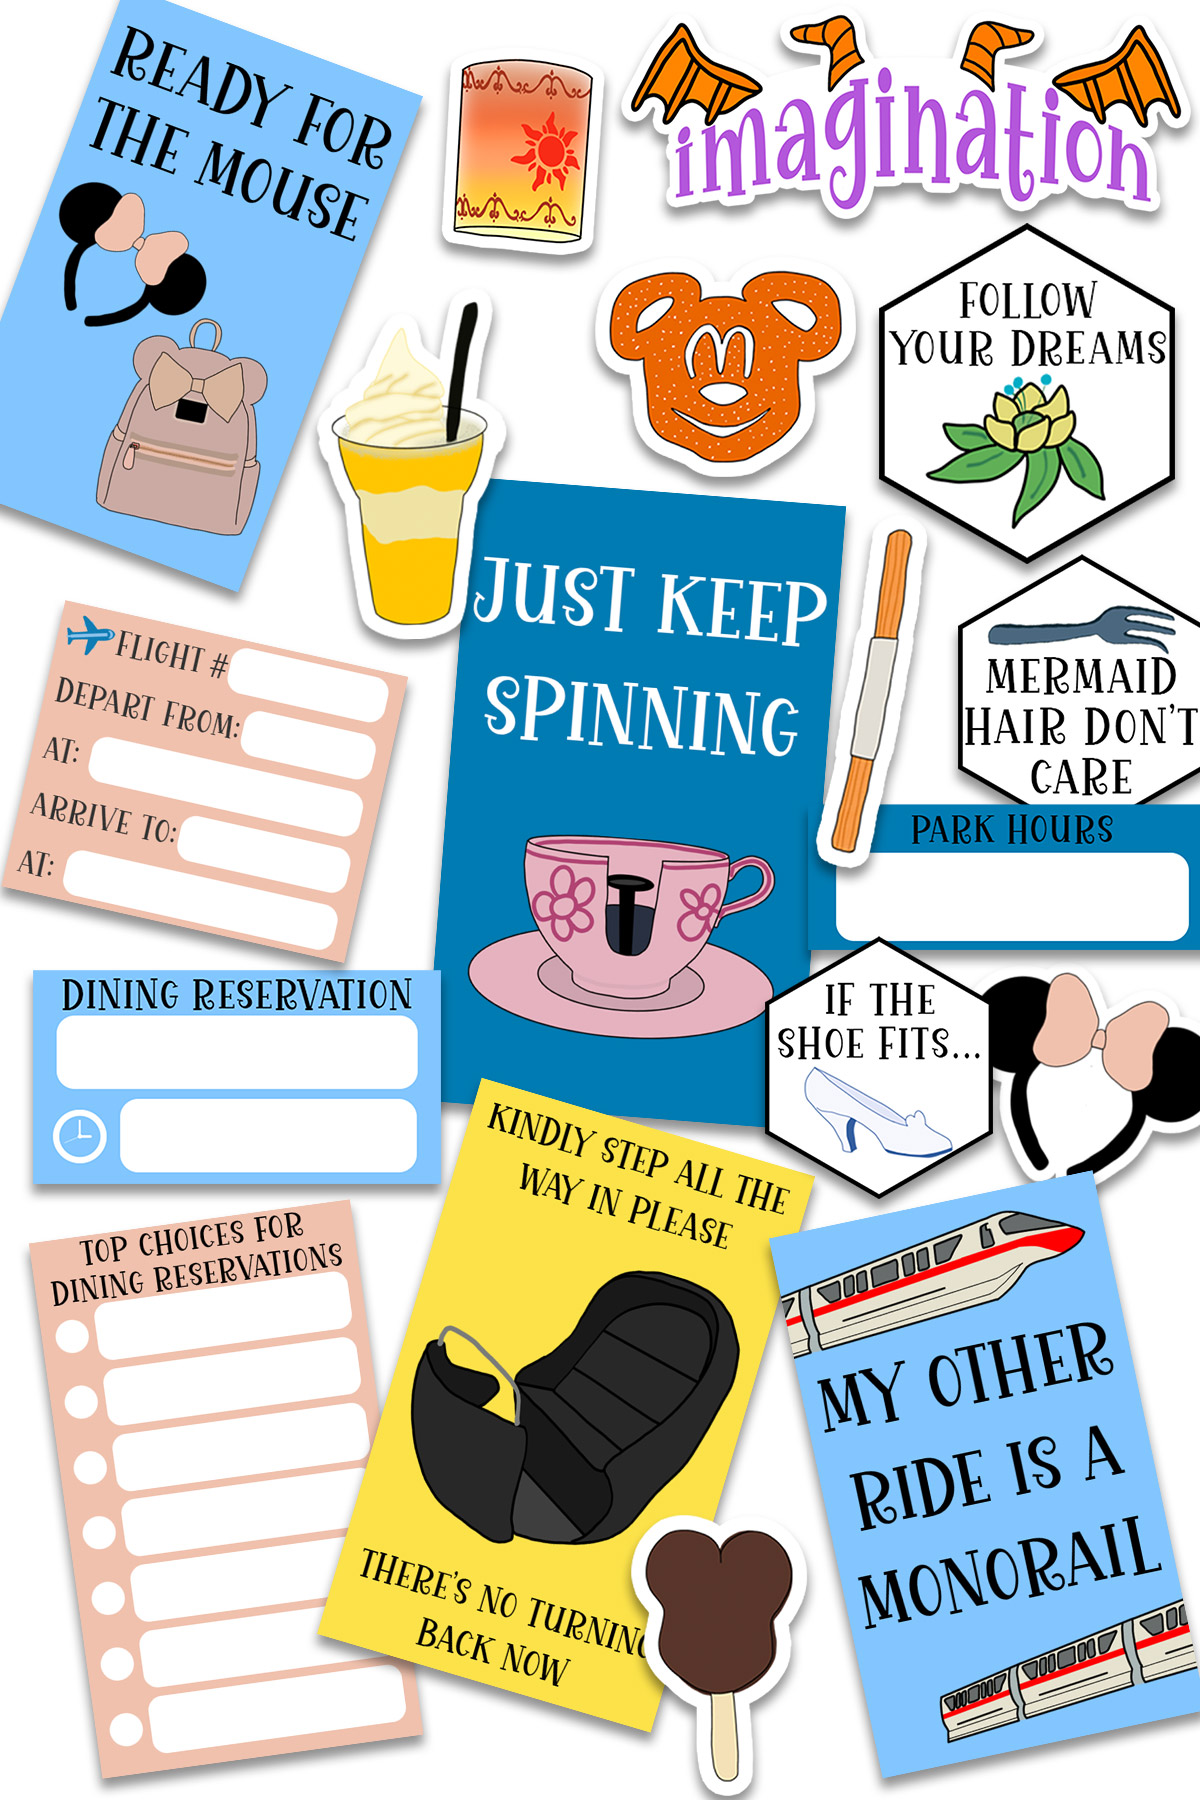 This image shows some of the free theme park planner stickers you can get at the end of this blog post. They are Disney World castle inspired in colors and design.